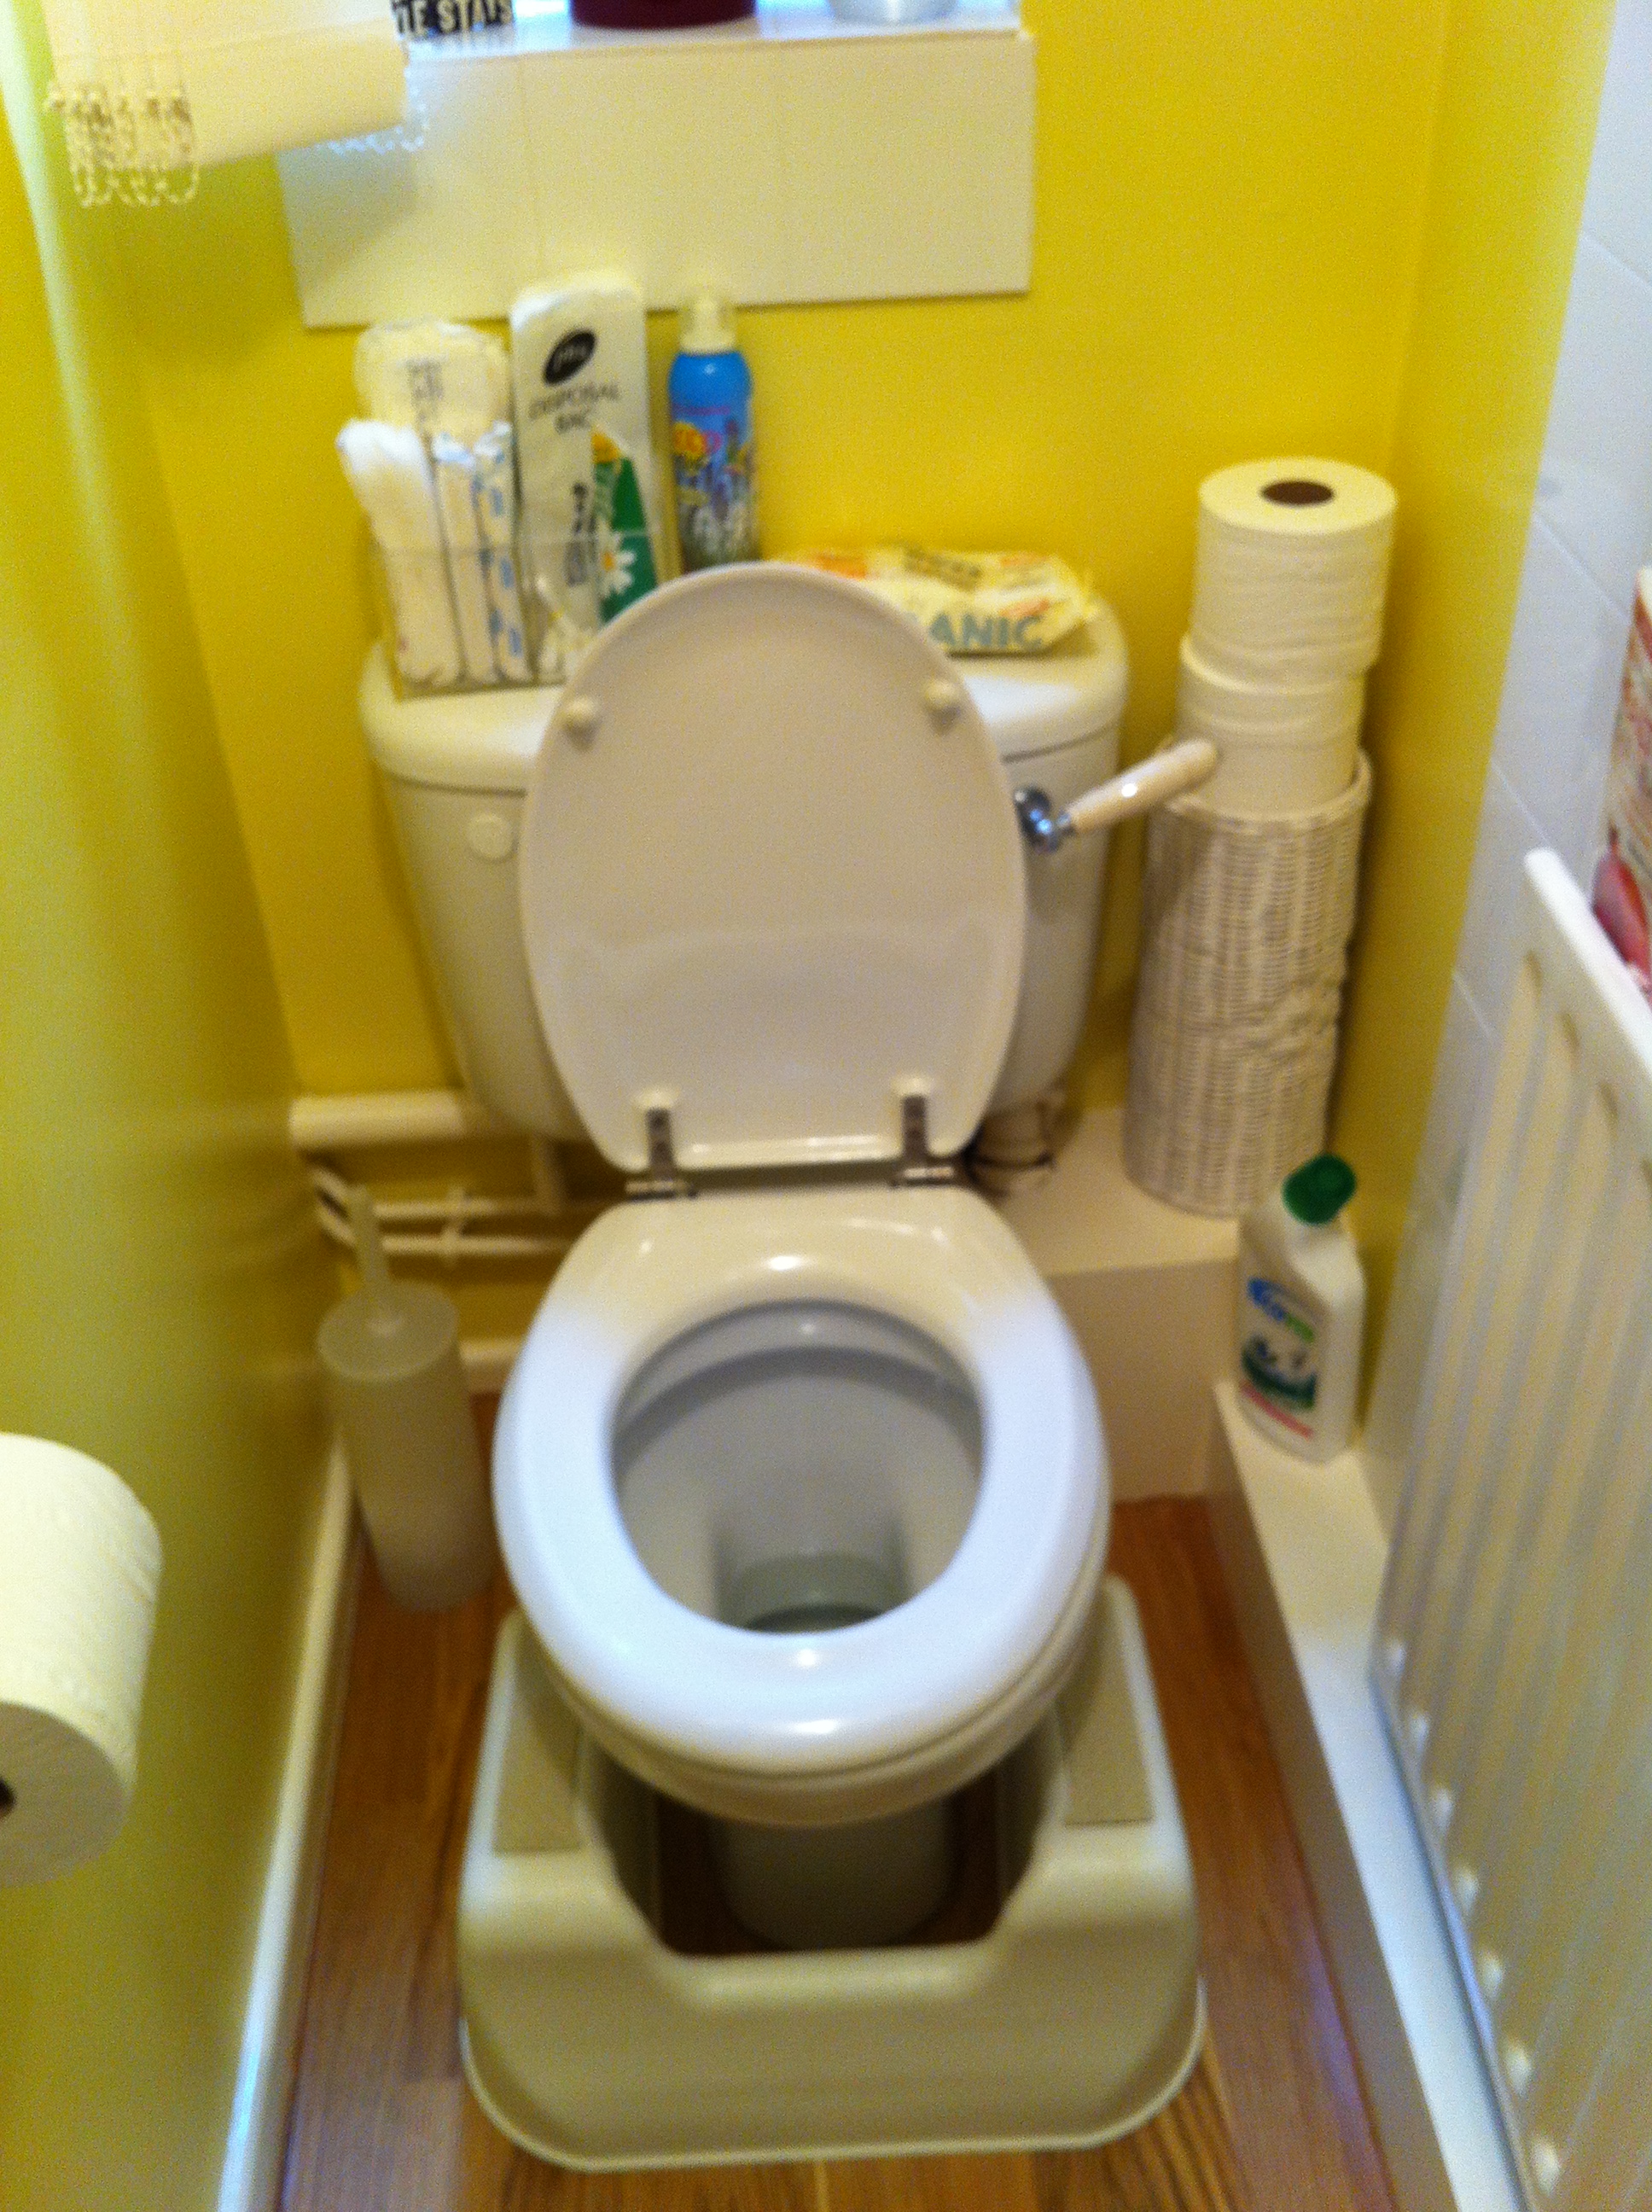 A snapshot of the toilet at my Clinic. Can you see the 'health step' on the floor?